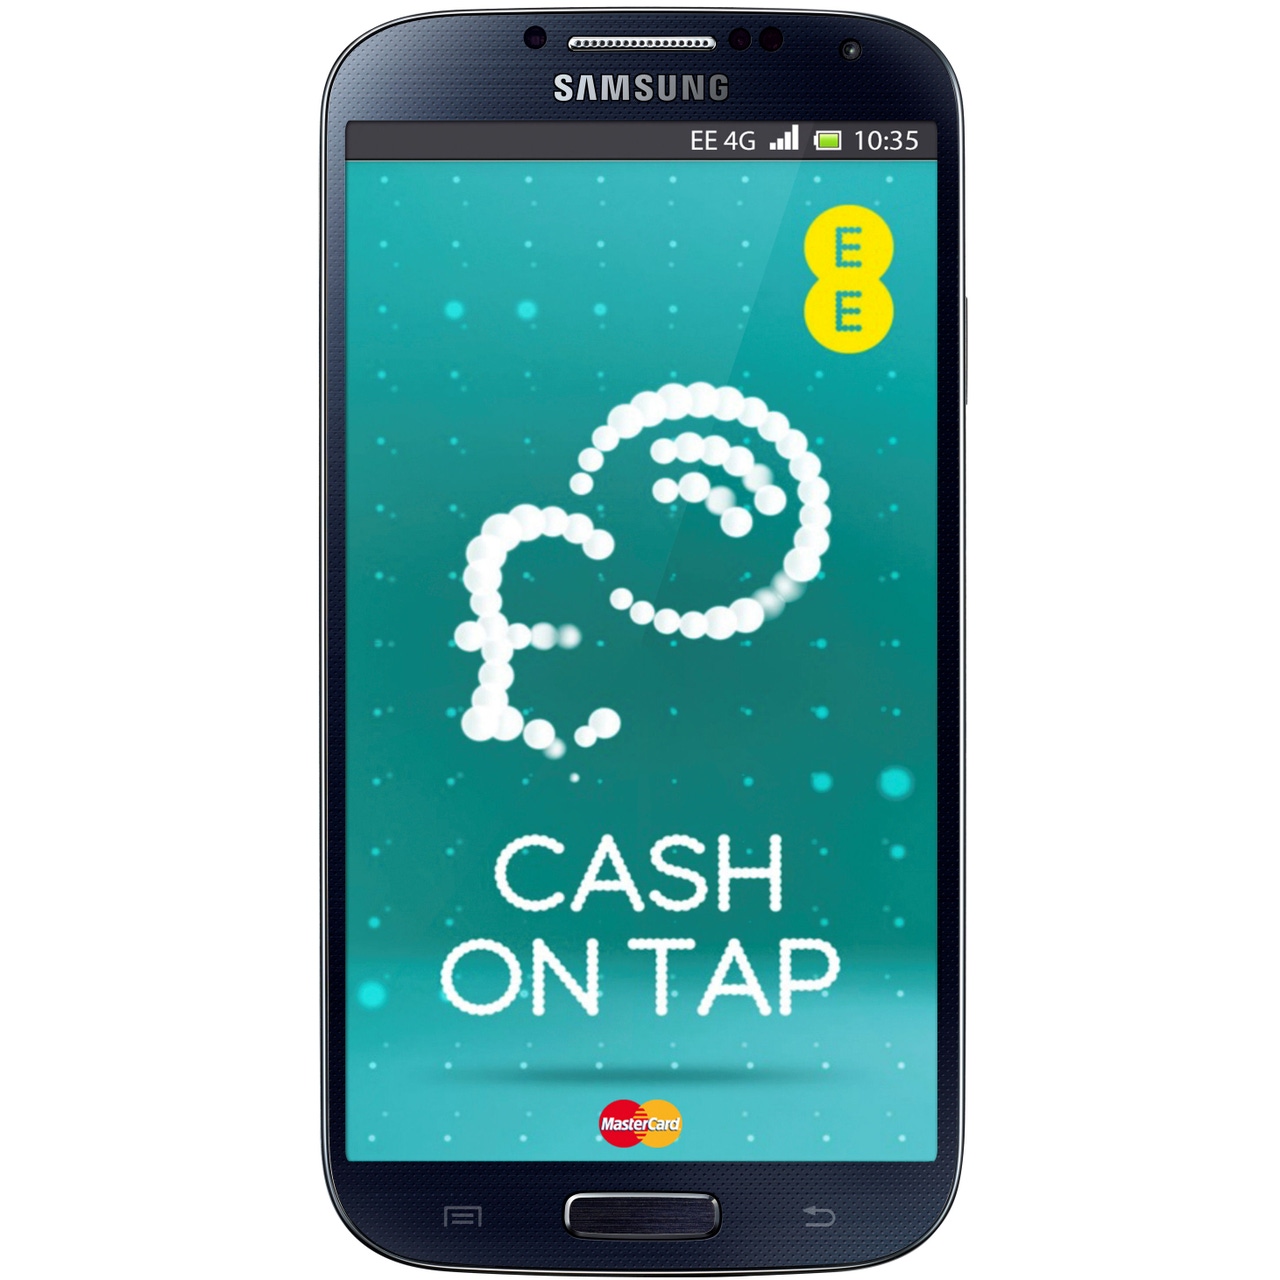 EE extends Cash on Tap contactless mobile payments to London Underground